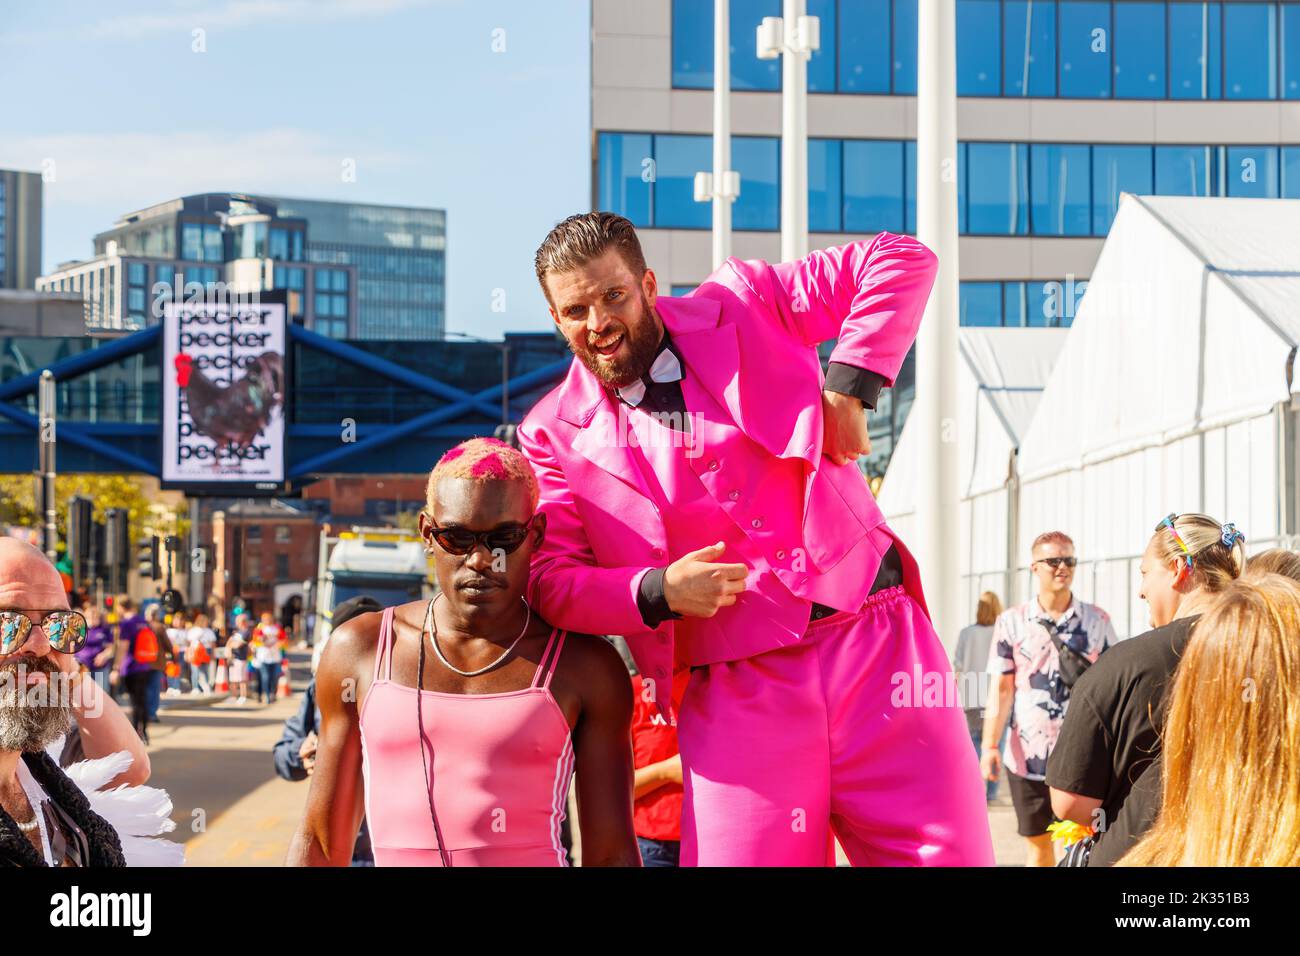 black skinned man wearing pink leotard with bearded man in suit on stilts Gay Pride parade protest 2022 in birmingham city centre uk september 24th Stock Photo